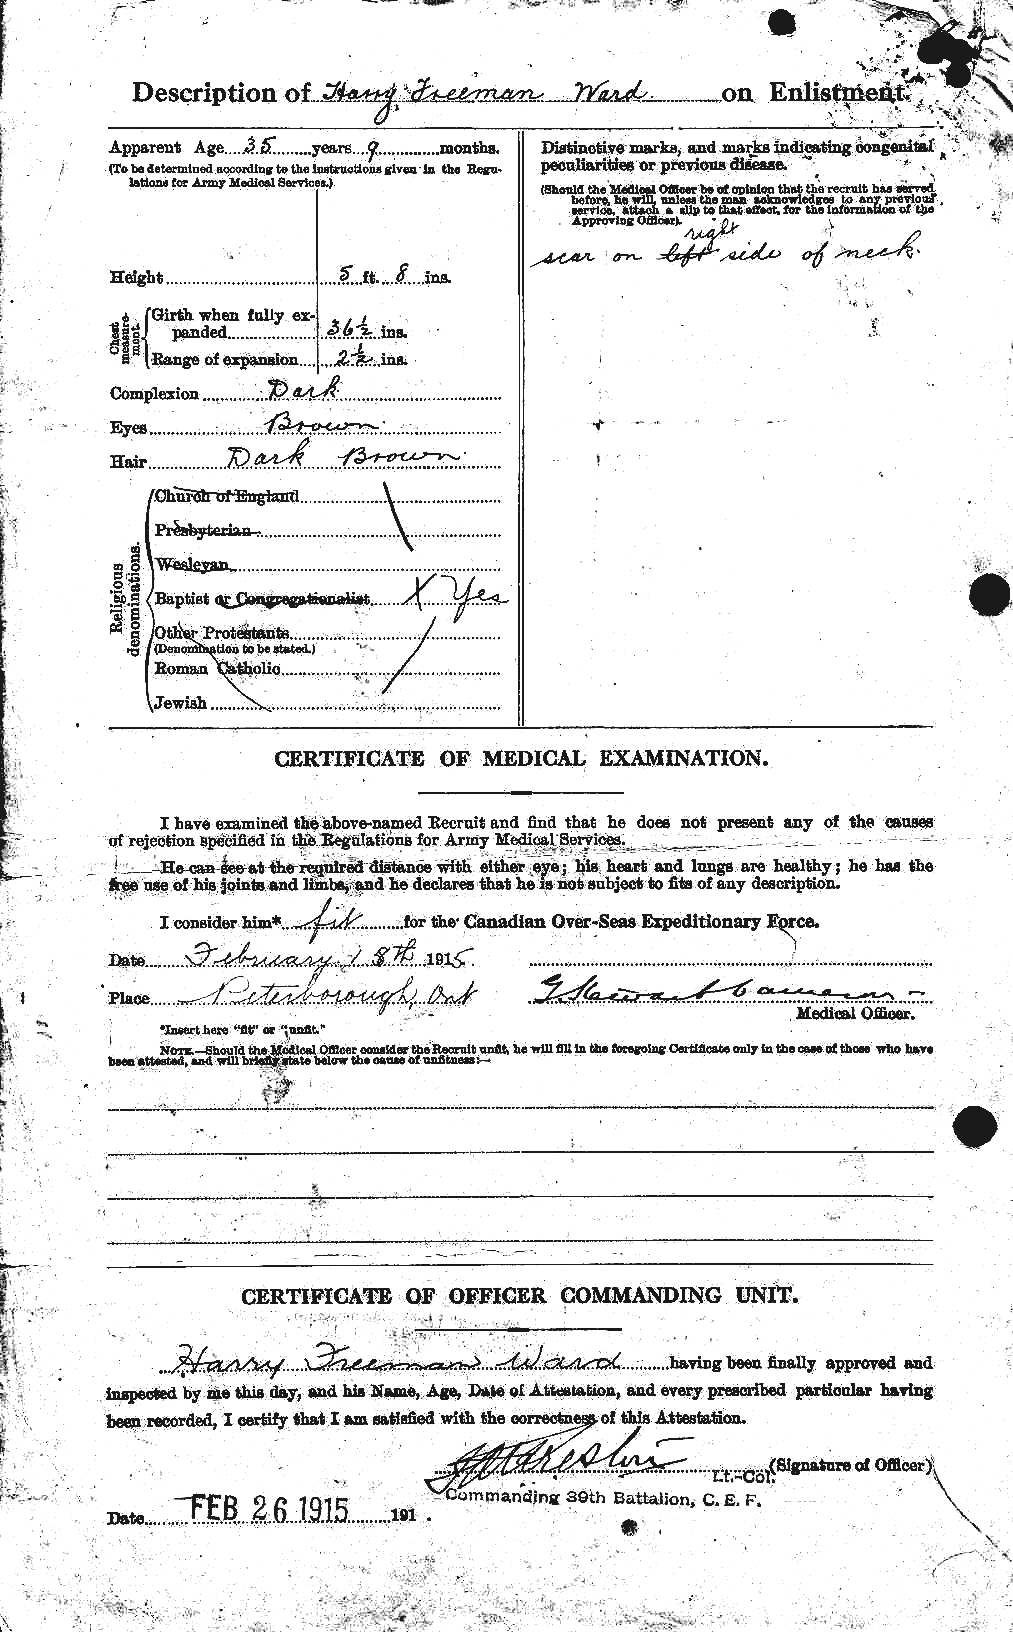 Personnel Records of the First World War - CEF 657813b